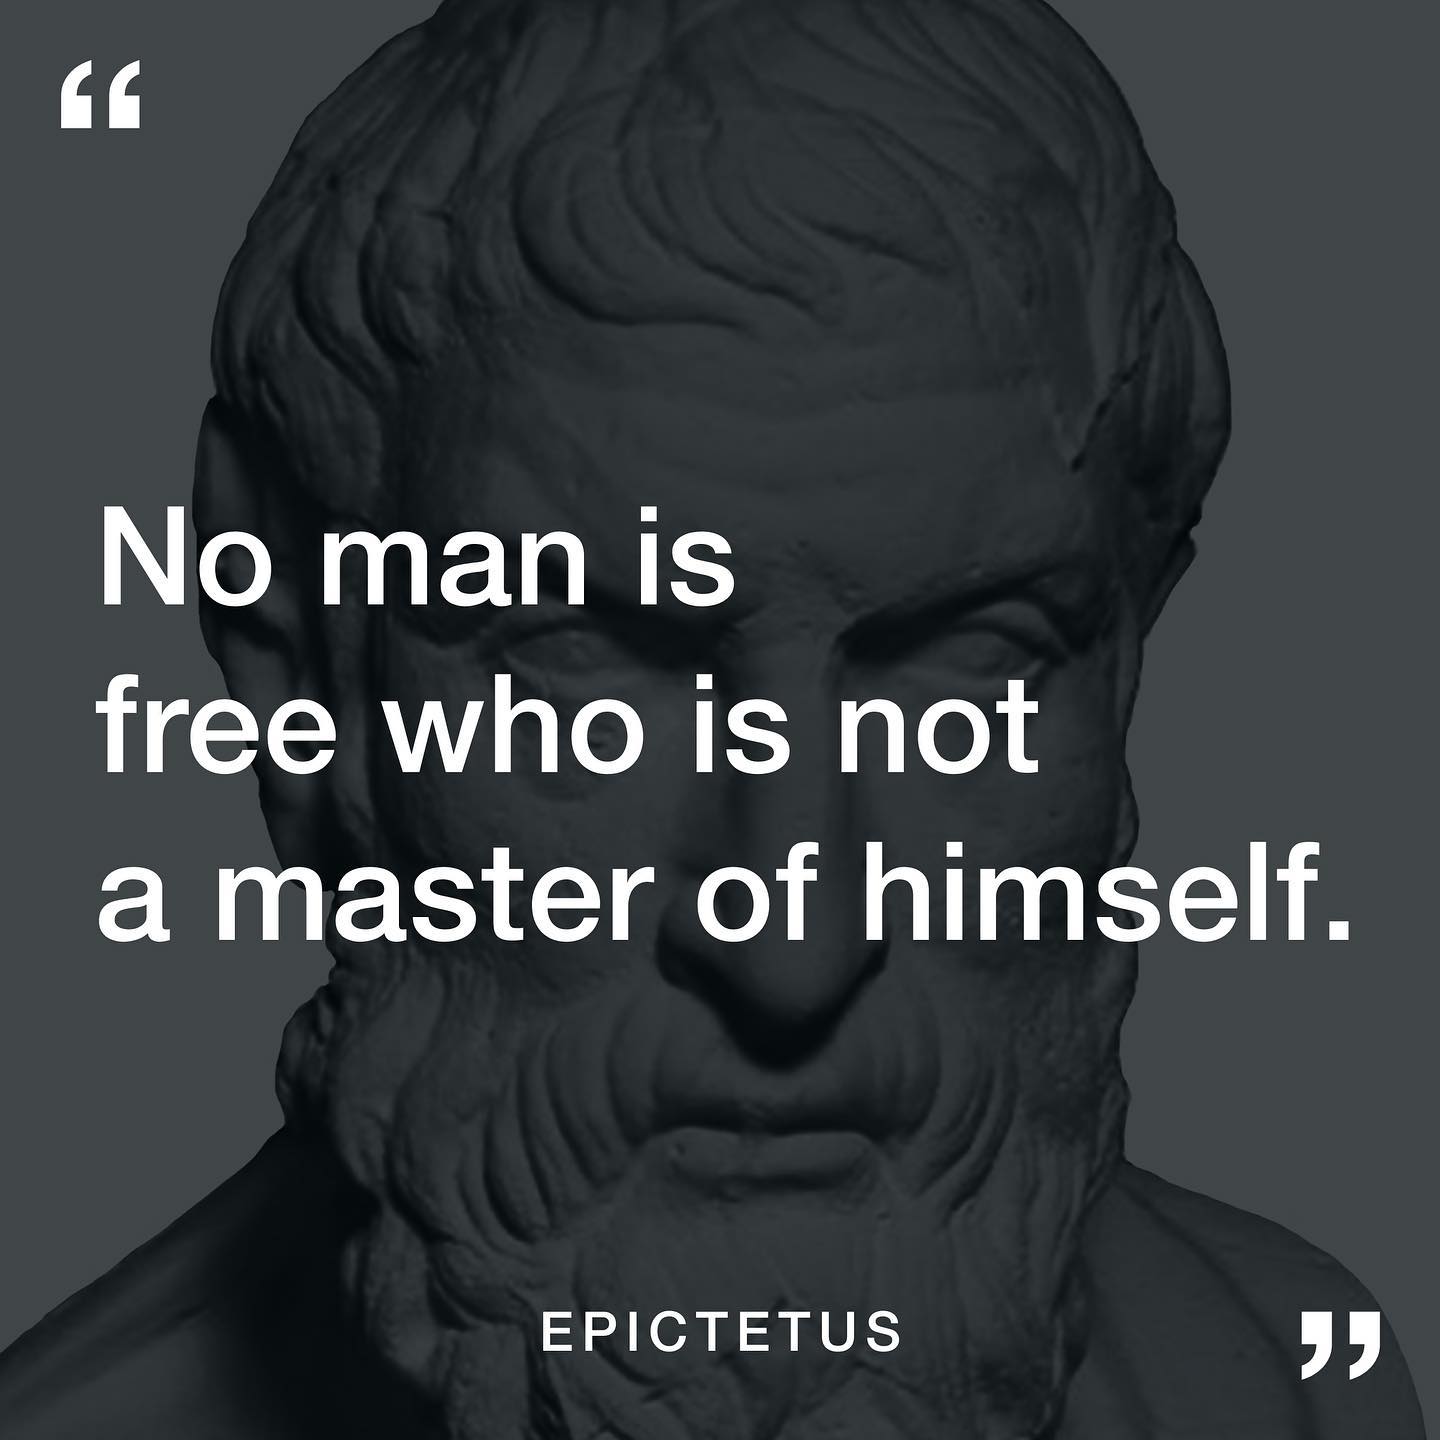 No man is free who is not master of himself.